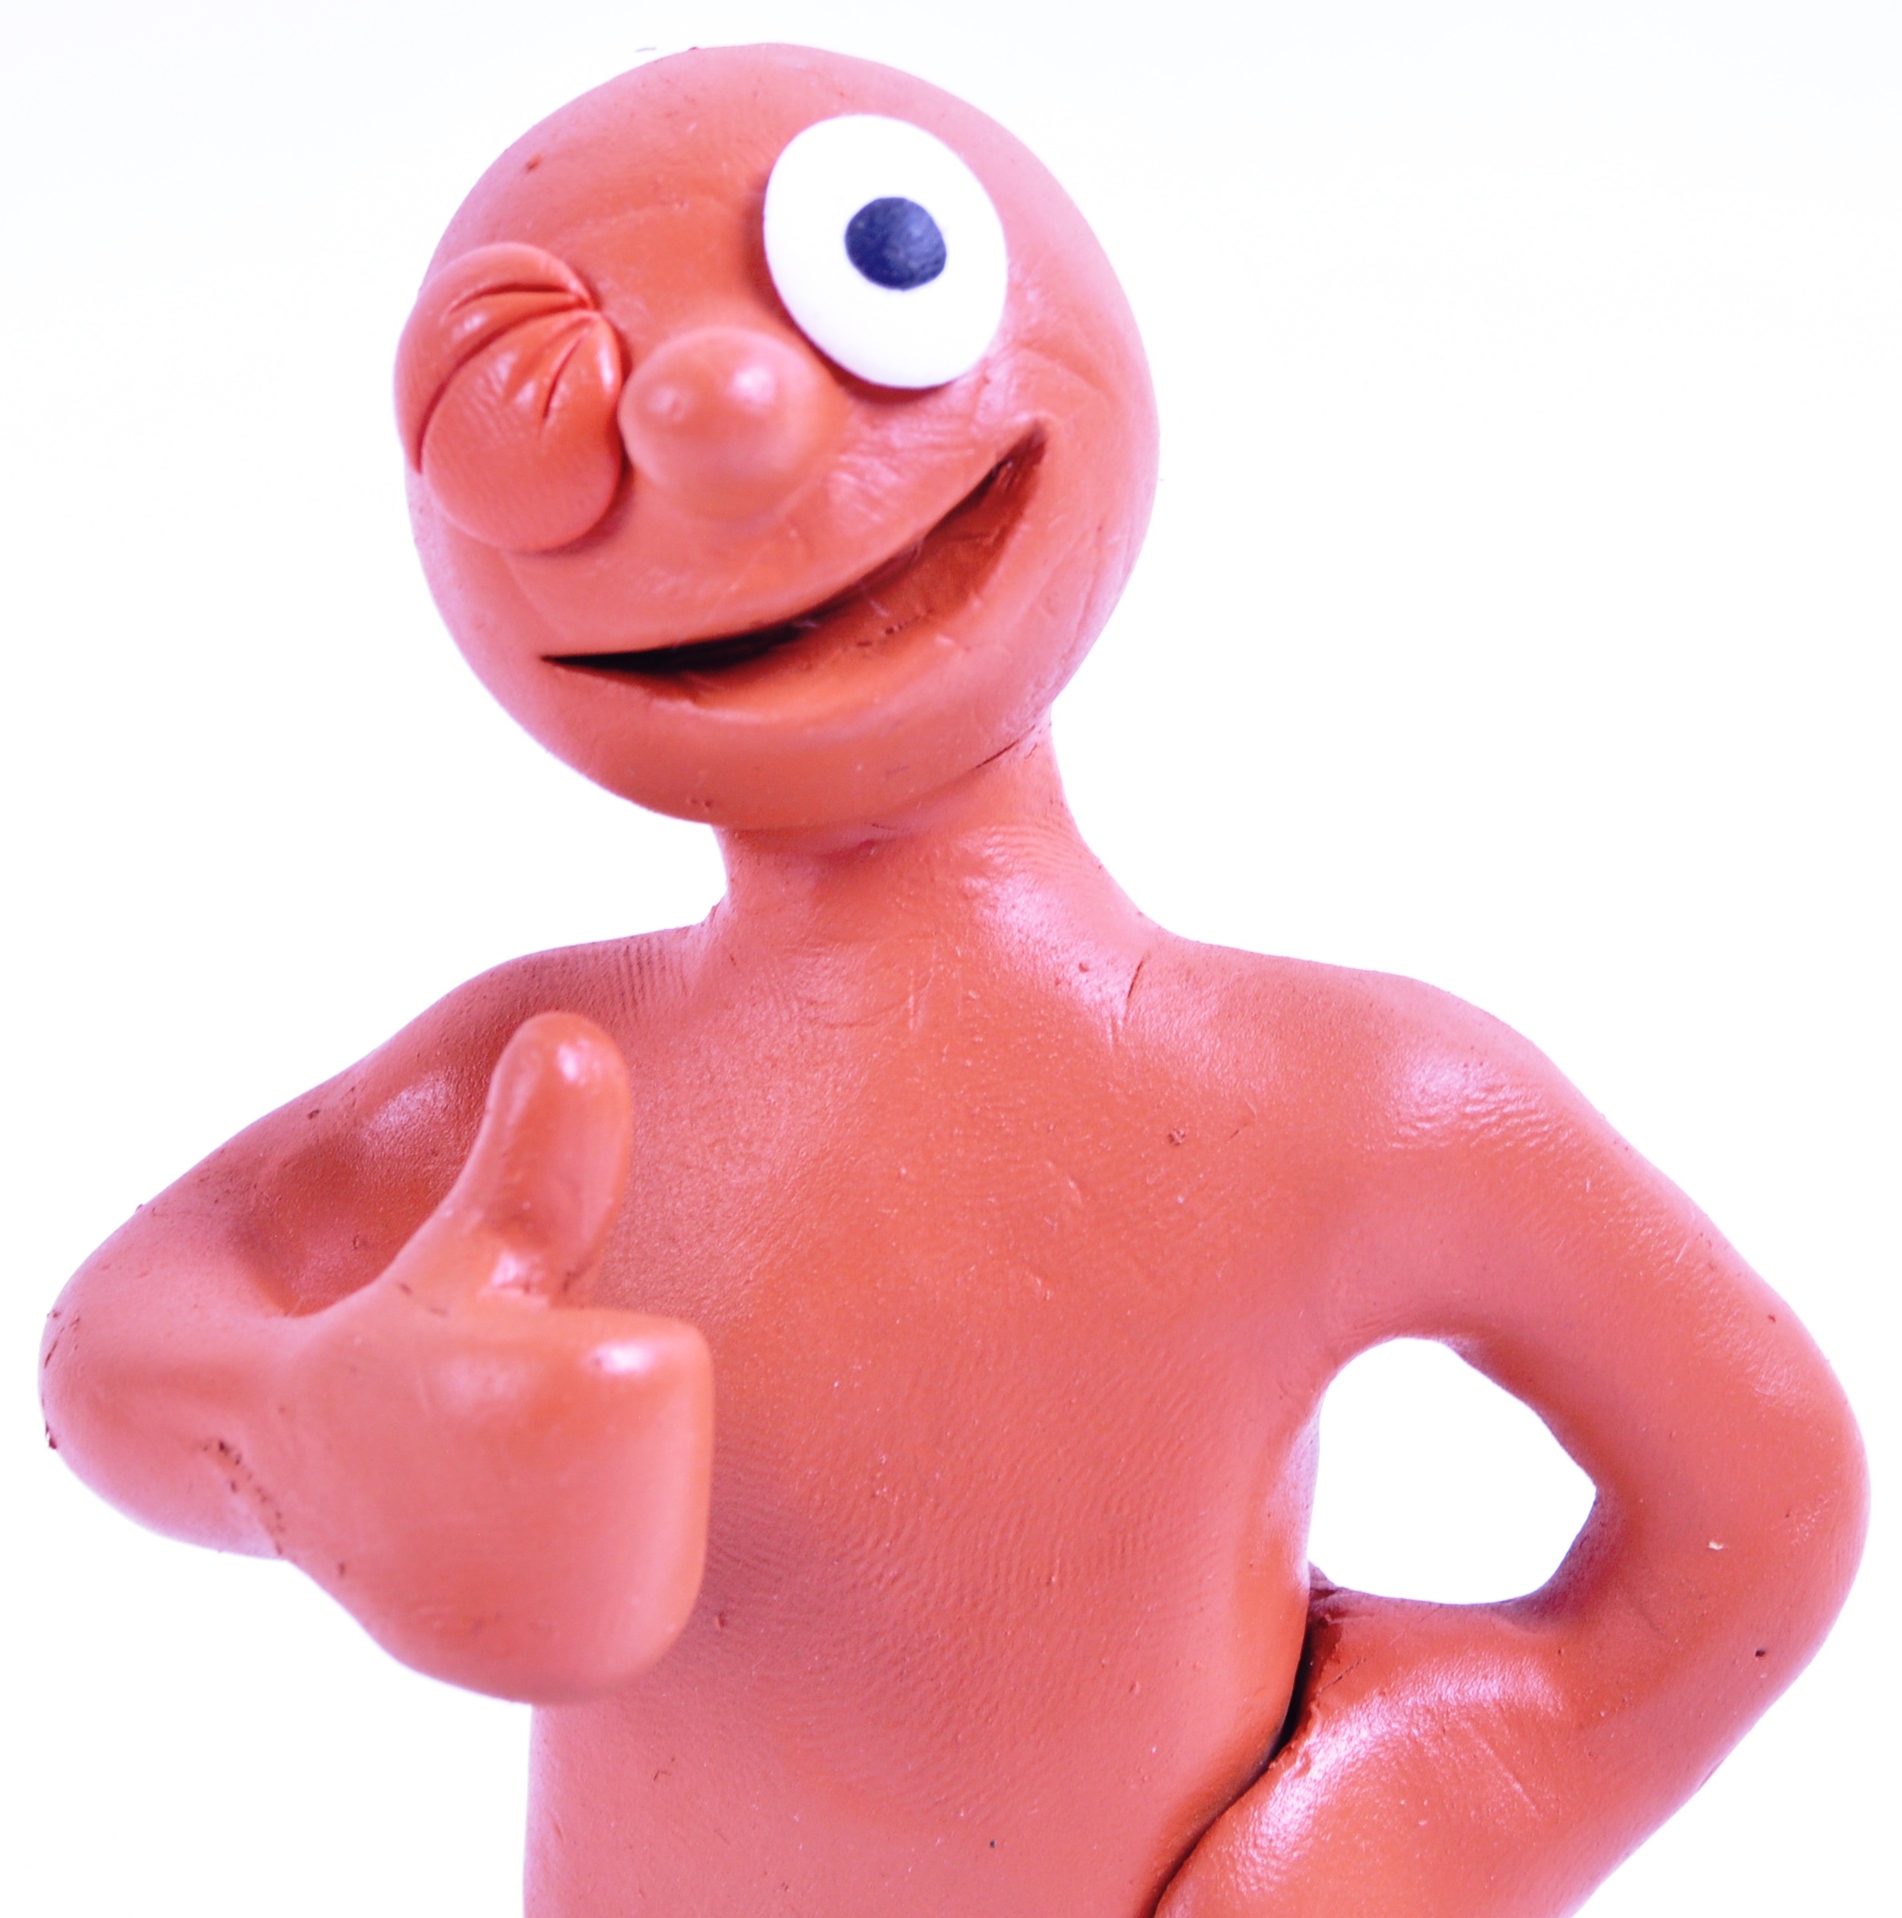 AARDMAN ANIMATIONS - MORPH - SIGNED MORPH STATUE WITH SKETCH - Image 3 of 4